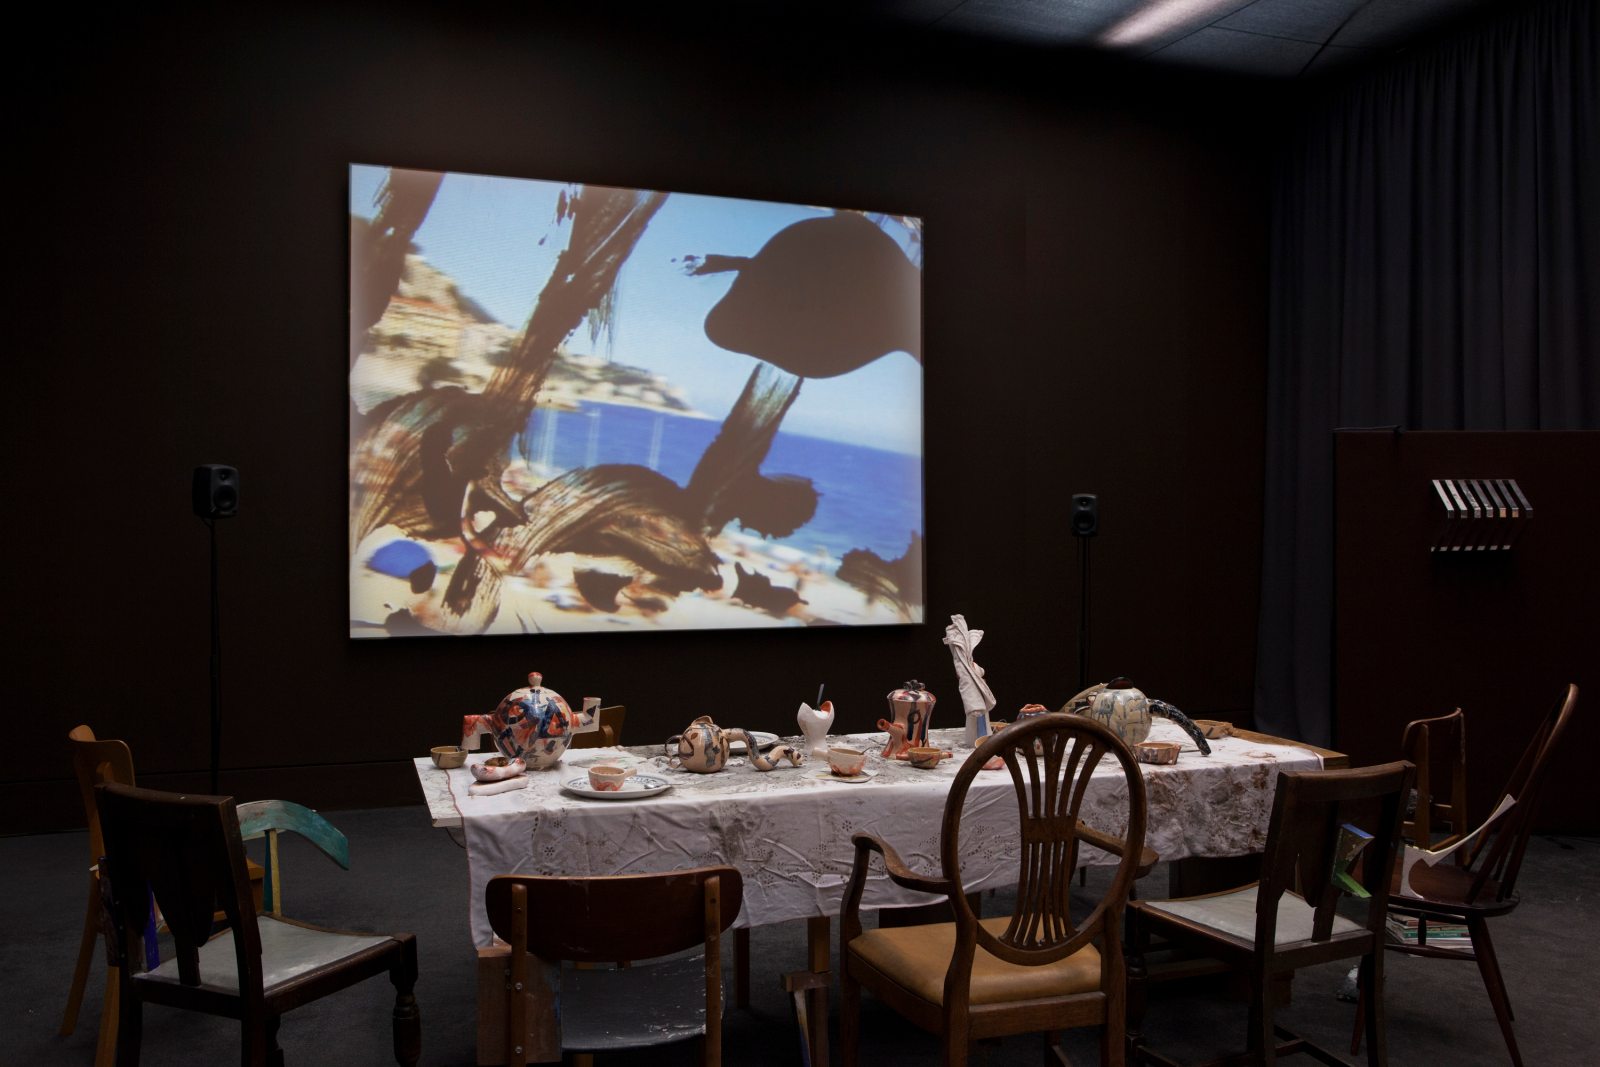 Laure Prouvost, installation view at the Tate Britain, Londres, 2013. Courtesy of Mot International (Bruxelles - Londres).